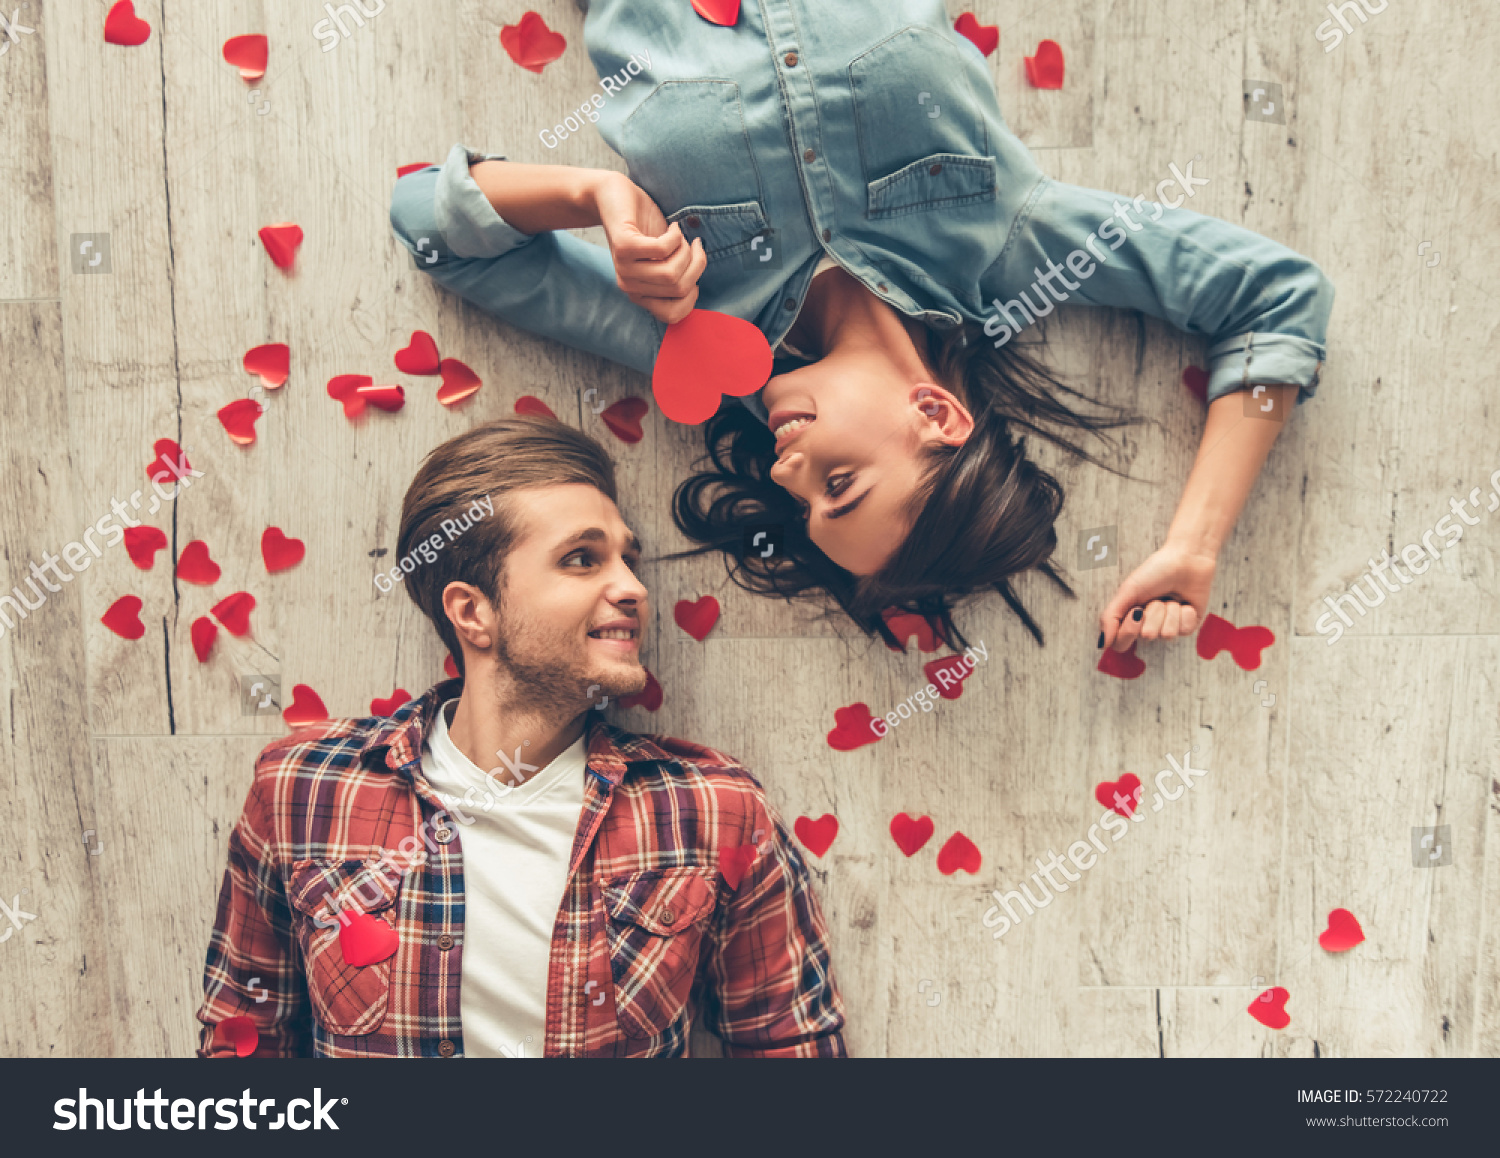 Top view of happy young couple looking at each other and smiling while lying on wooden floor. Girl is holding a red paper heart #572240722